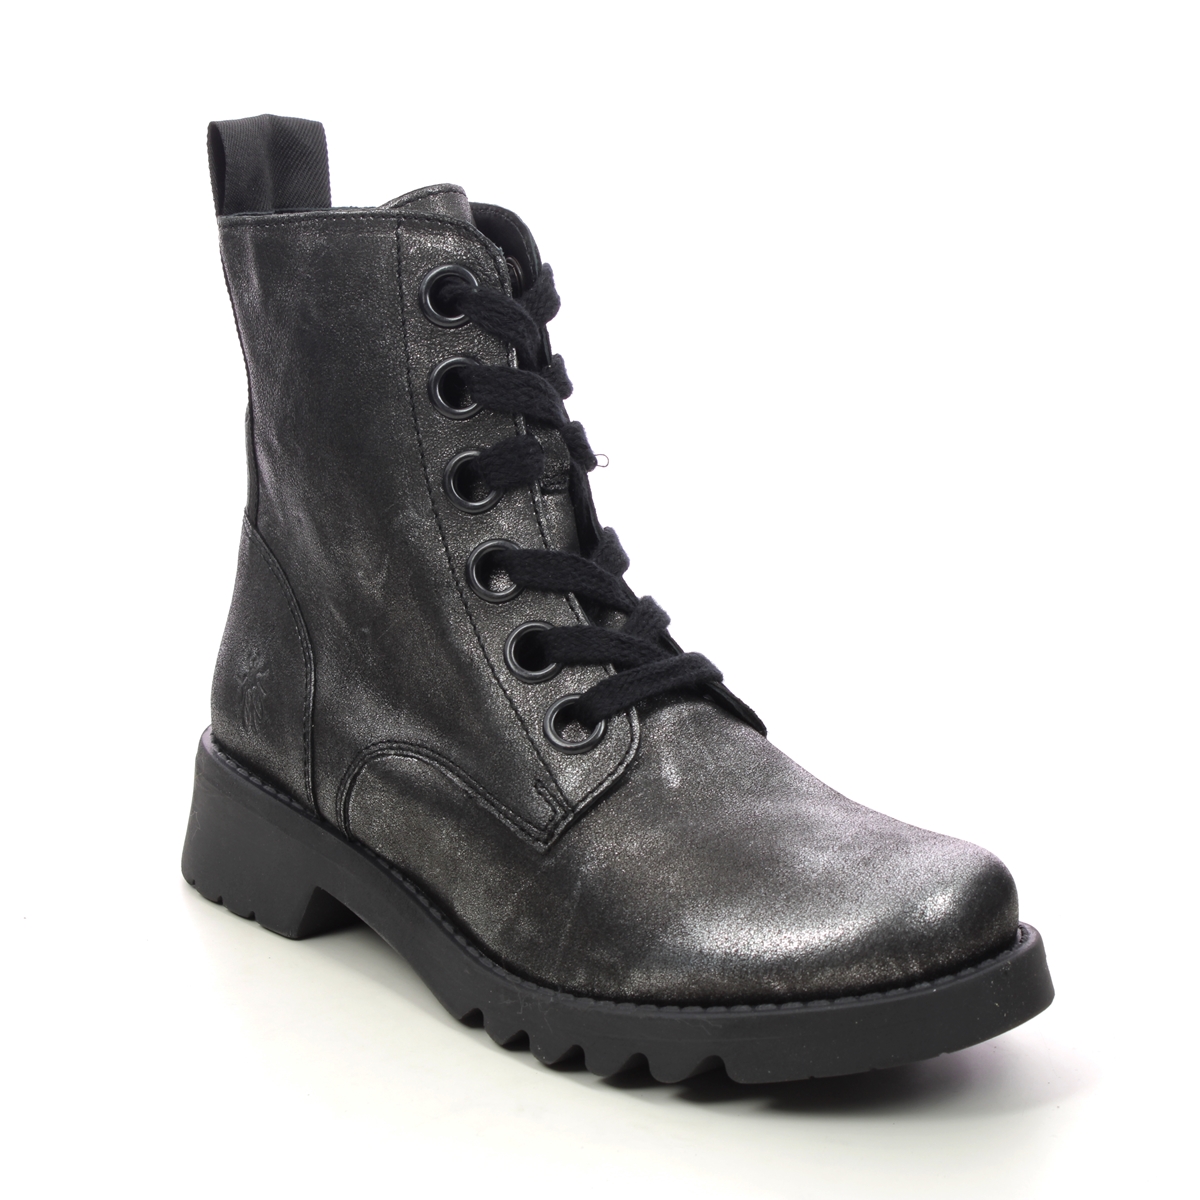 Fly London Ragi  Ronin Silver Glitz Womens Lace Up Boots P144539-035 in a Plain Leather in Size 41